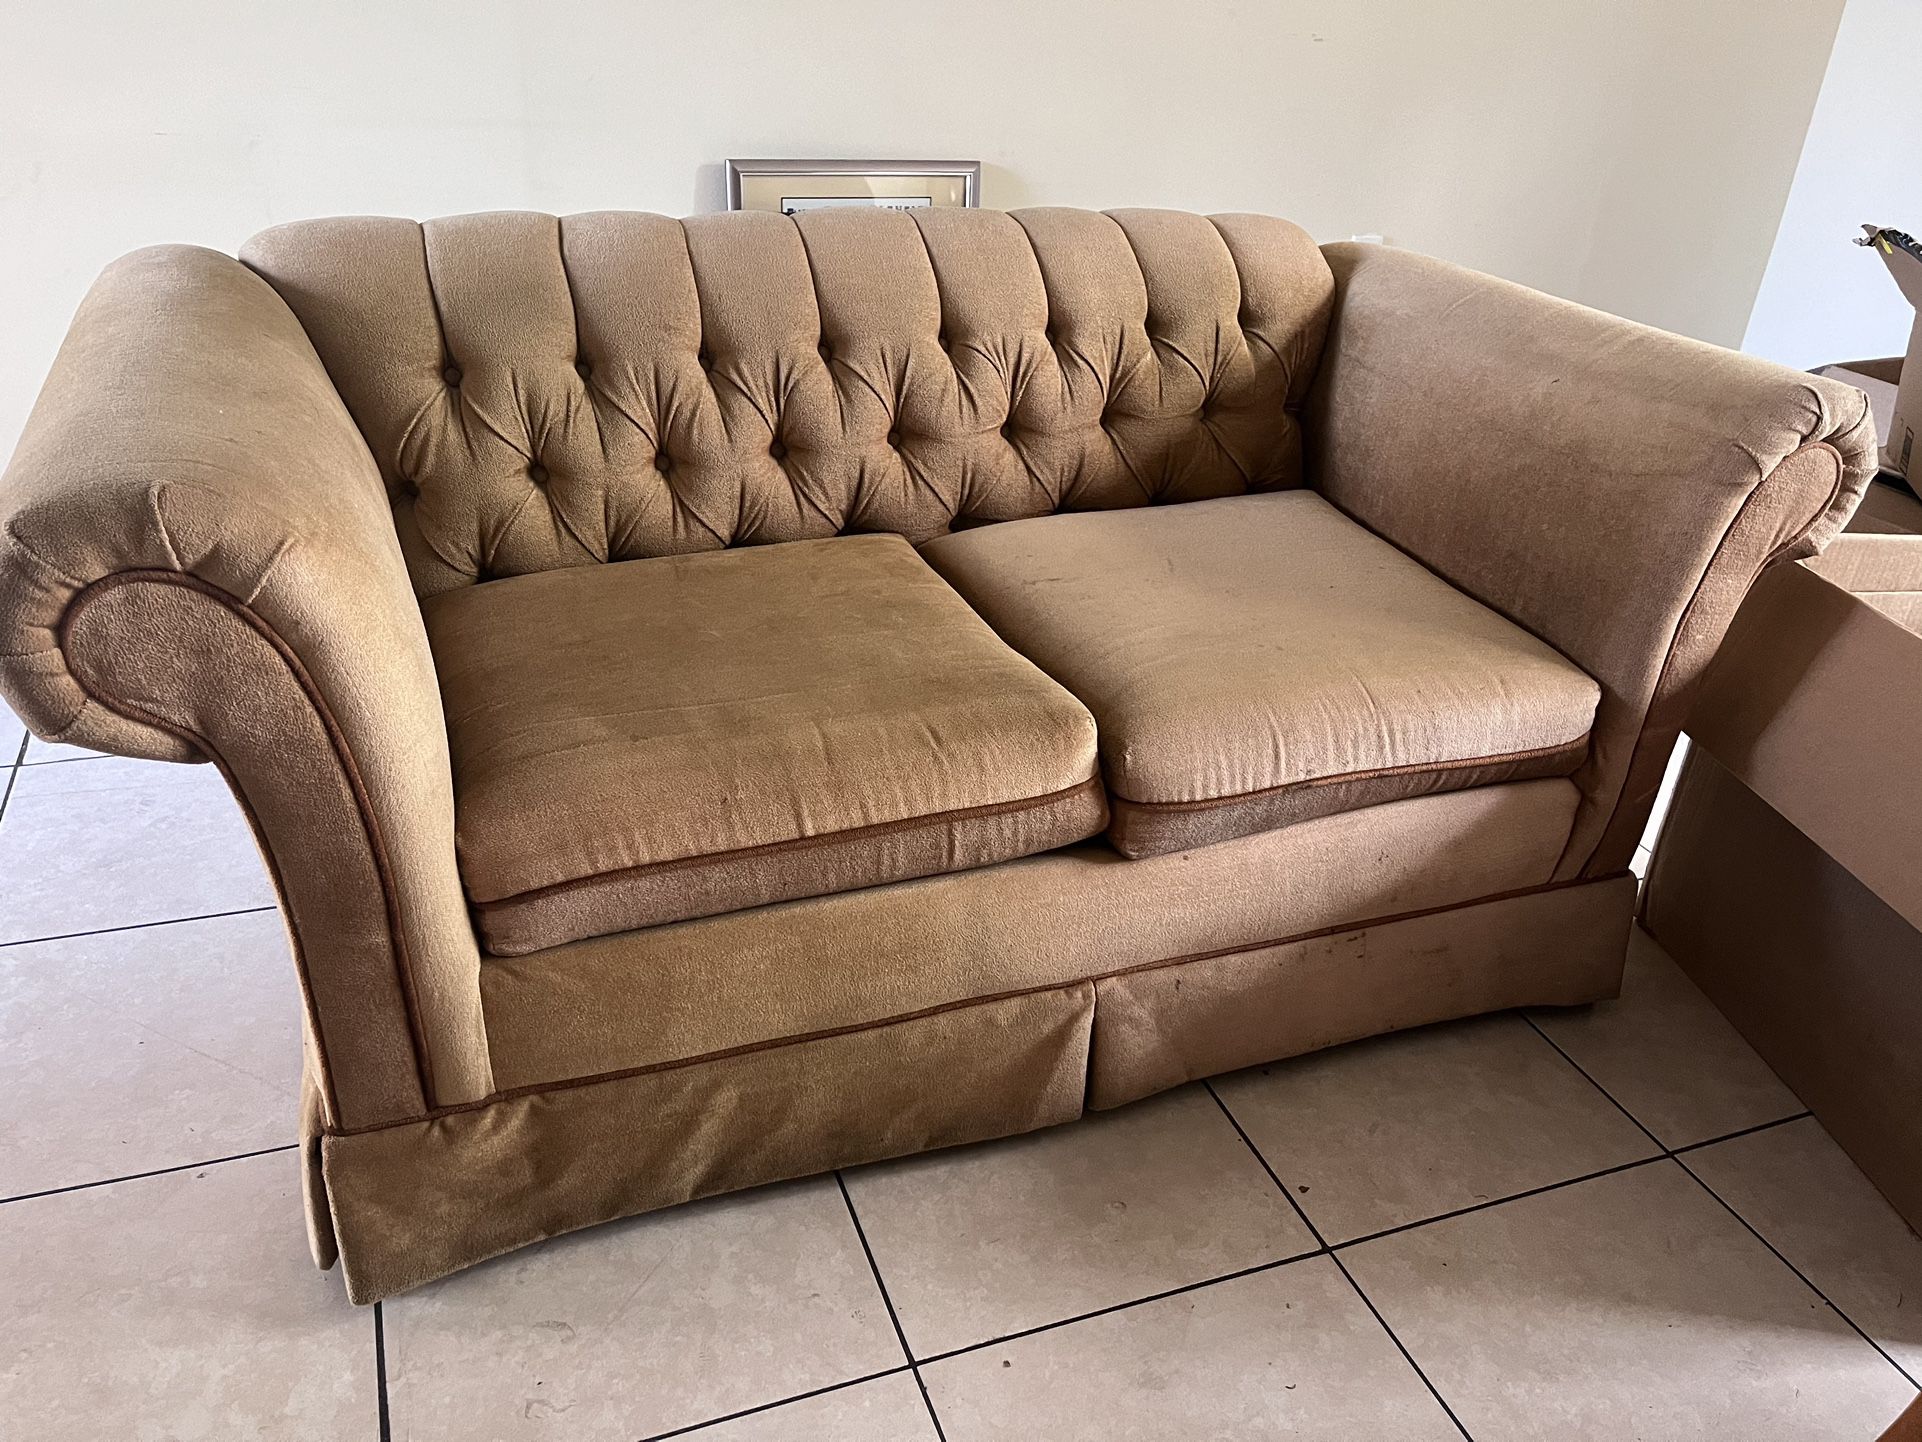 Loveseat Small Sofa Couch 